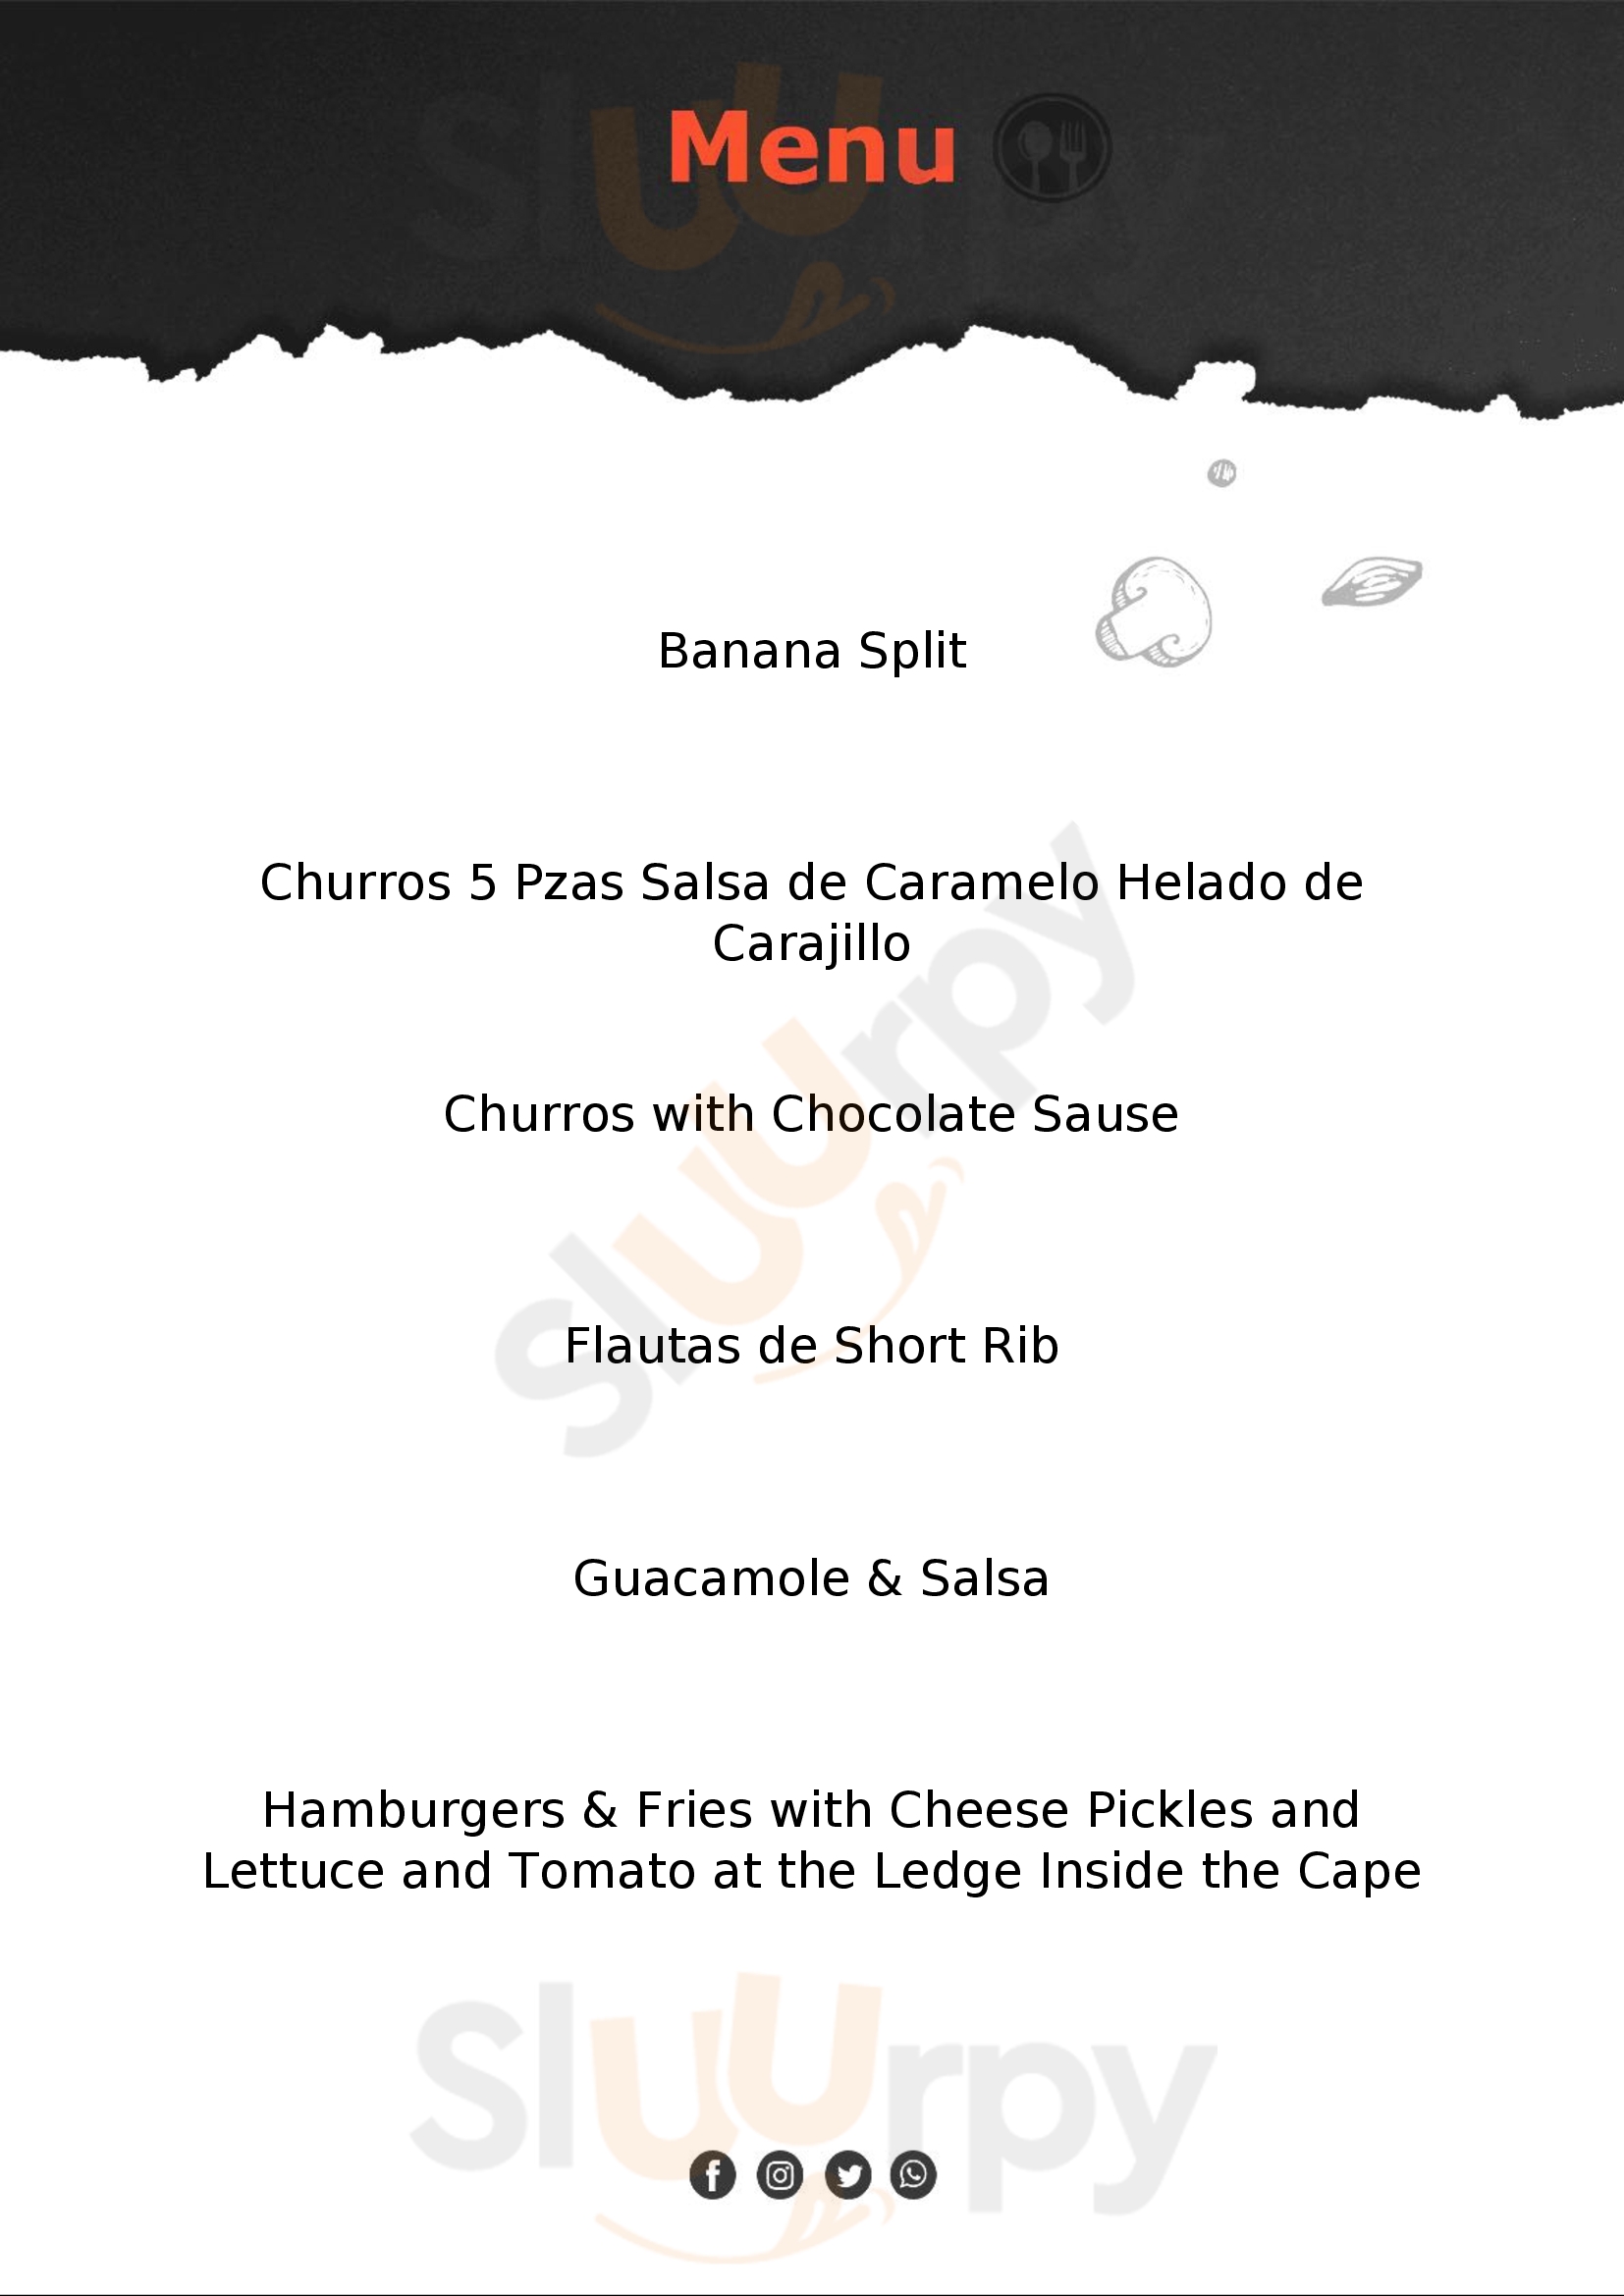 The Rooftop At The Cape A Thompson Hotel Cabo San Lucas Menu - 1